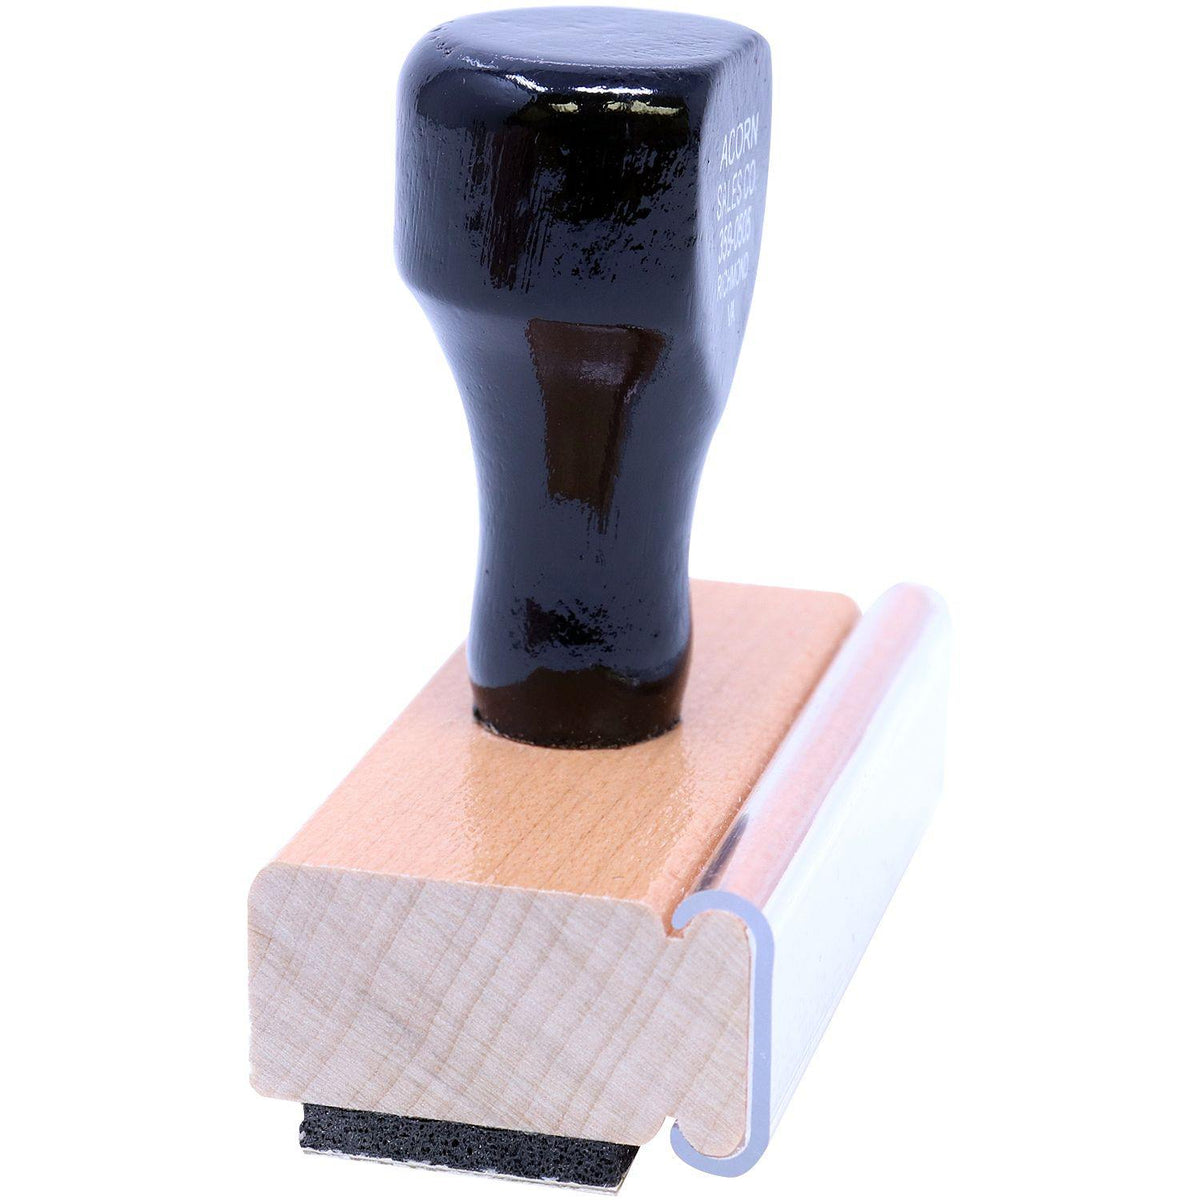 Side View of Additional Postage Required Rubber Stamp at an Angle